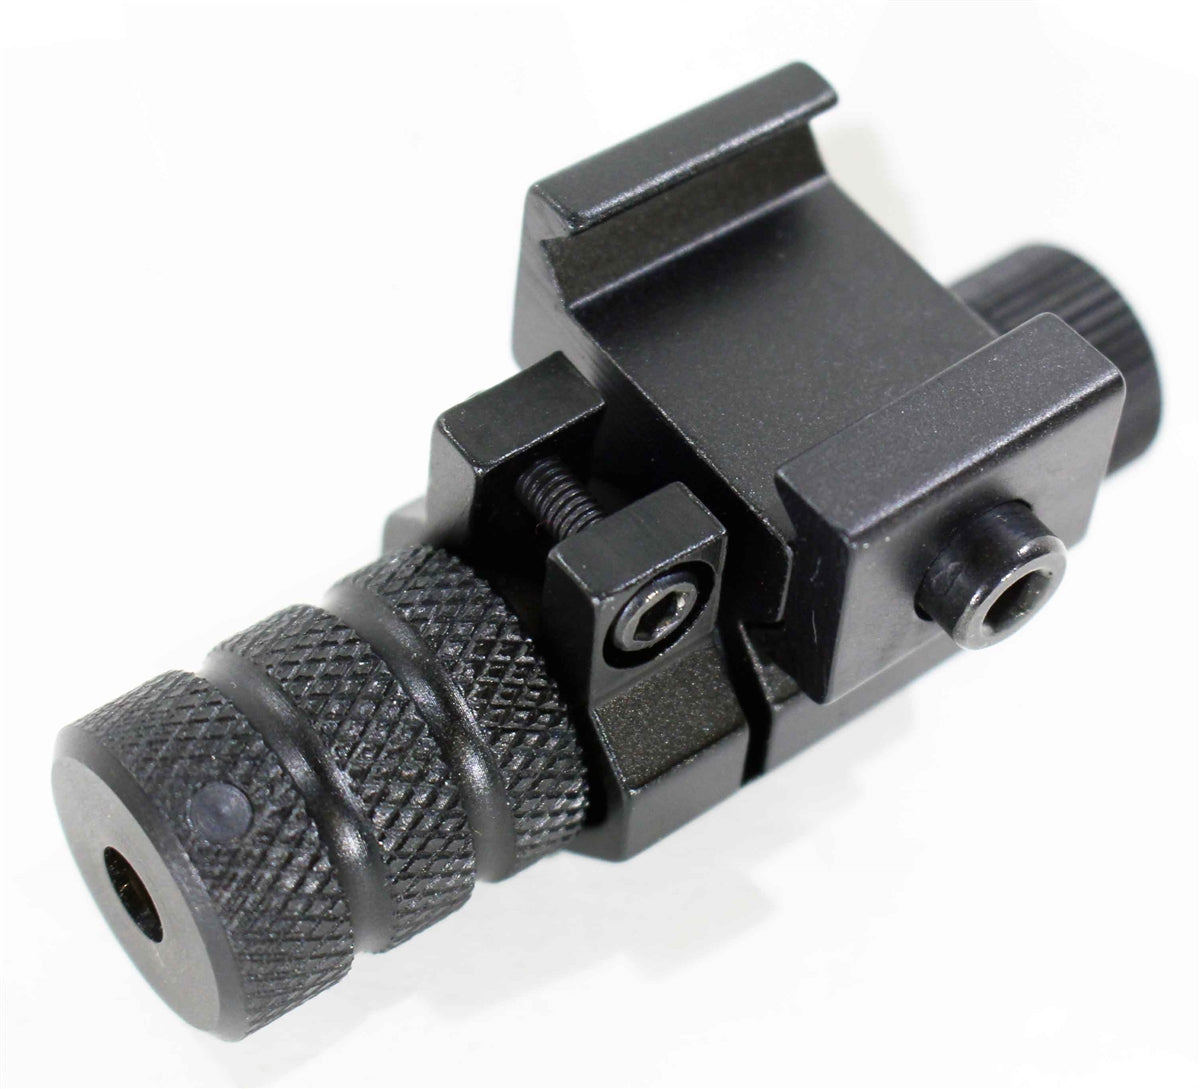 Trinity Red Dot Laser Sight Compatible With Handguns With Picatinny Rail Already Installed.